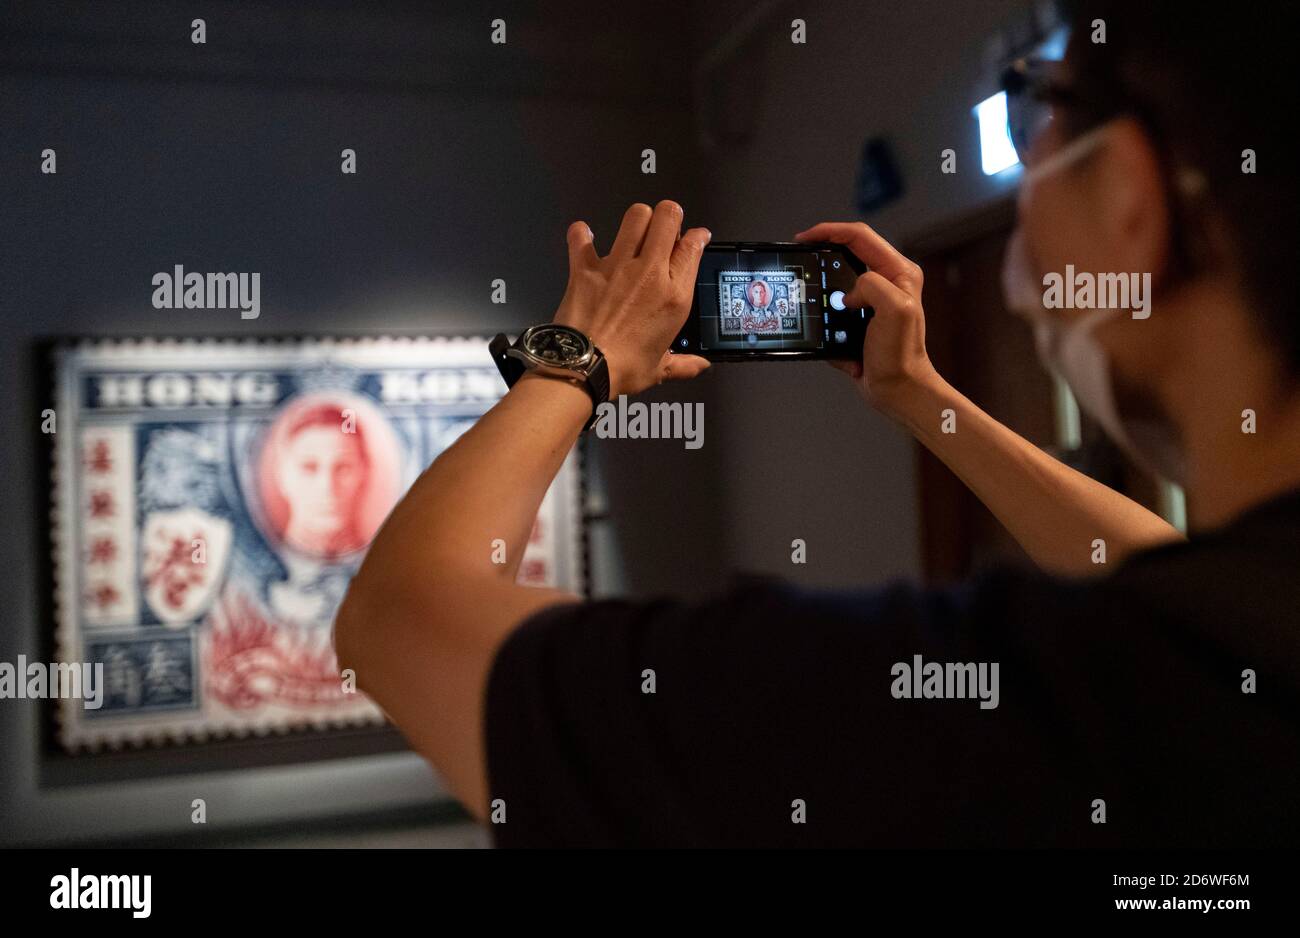 A visitor takes a picture with his mobile phone of a stamp during colonial time at 'The Hong Kong Story' exhibition of the Hong Kong History Museum on its last day of opening before a two-year revamp.The permanent exhibition 'The Hong Kong Story' of the museum closed on 19 October 2020 for a major renovation for the next coming years creating a public concern whether the exhibitions and facts will remain untouched once it reopens. Stock Photo